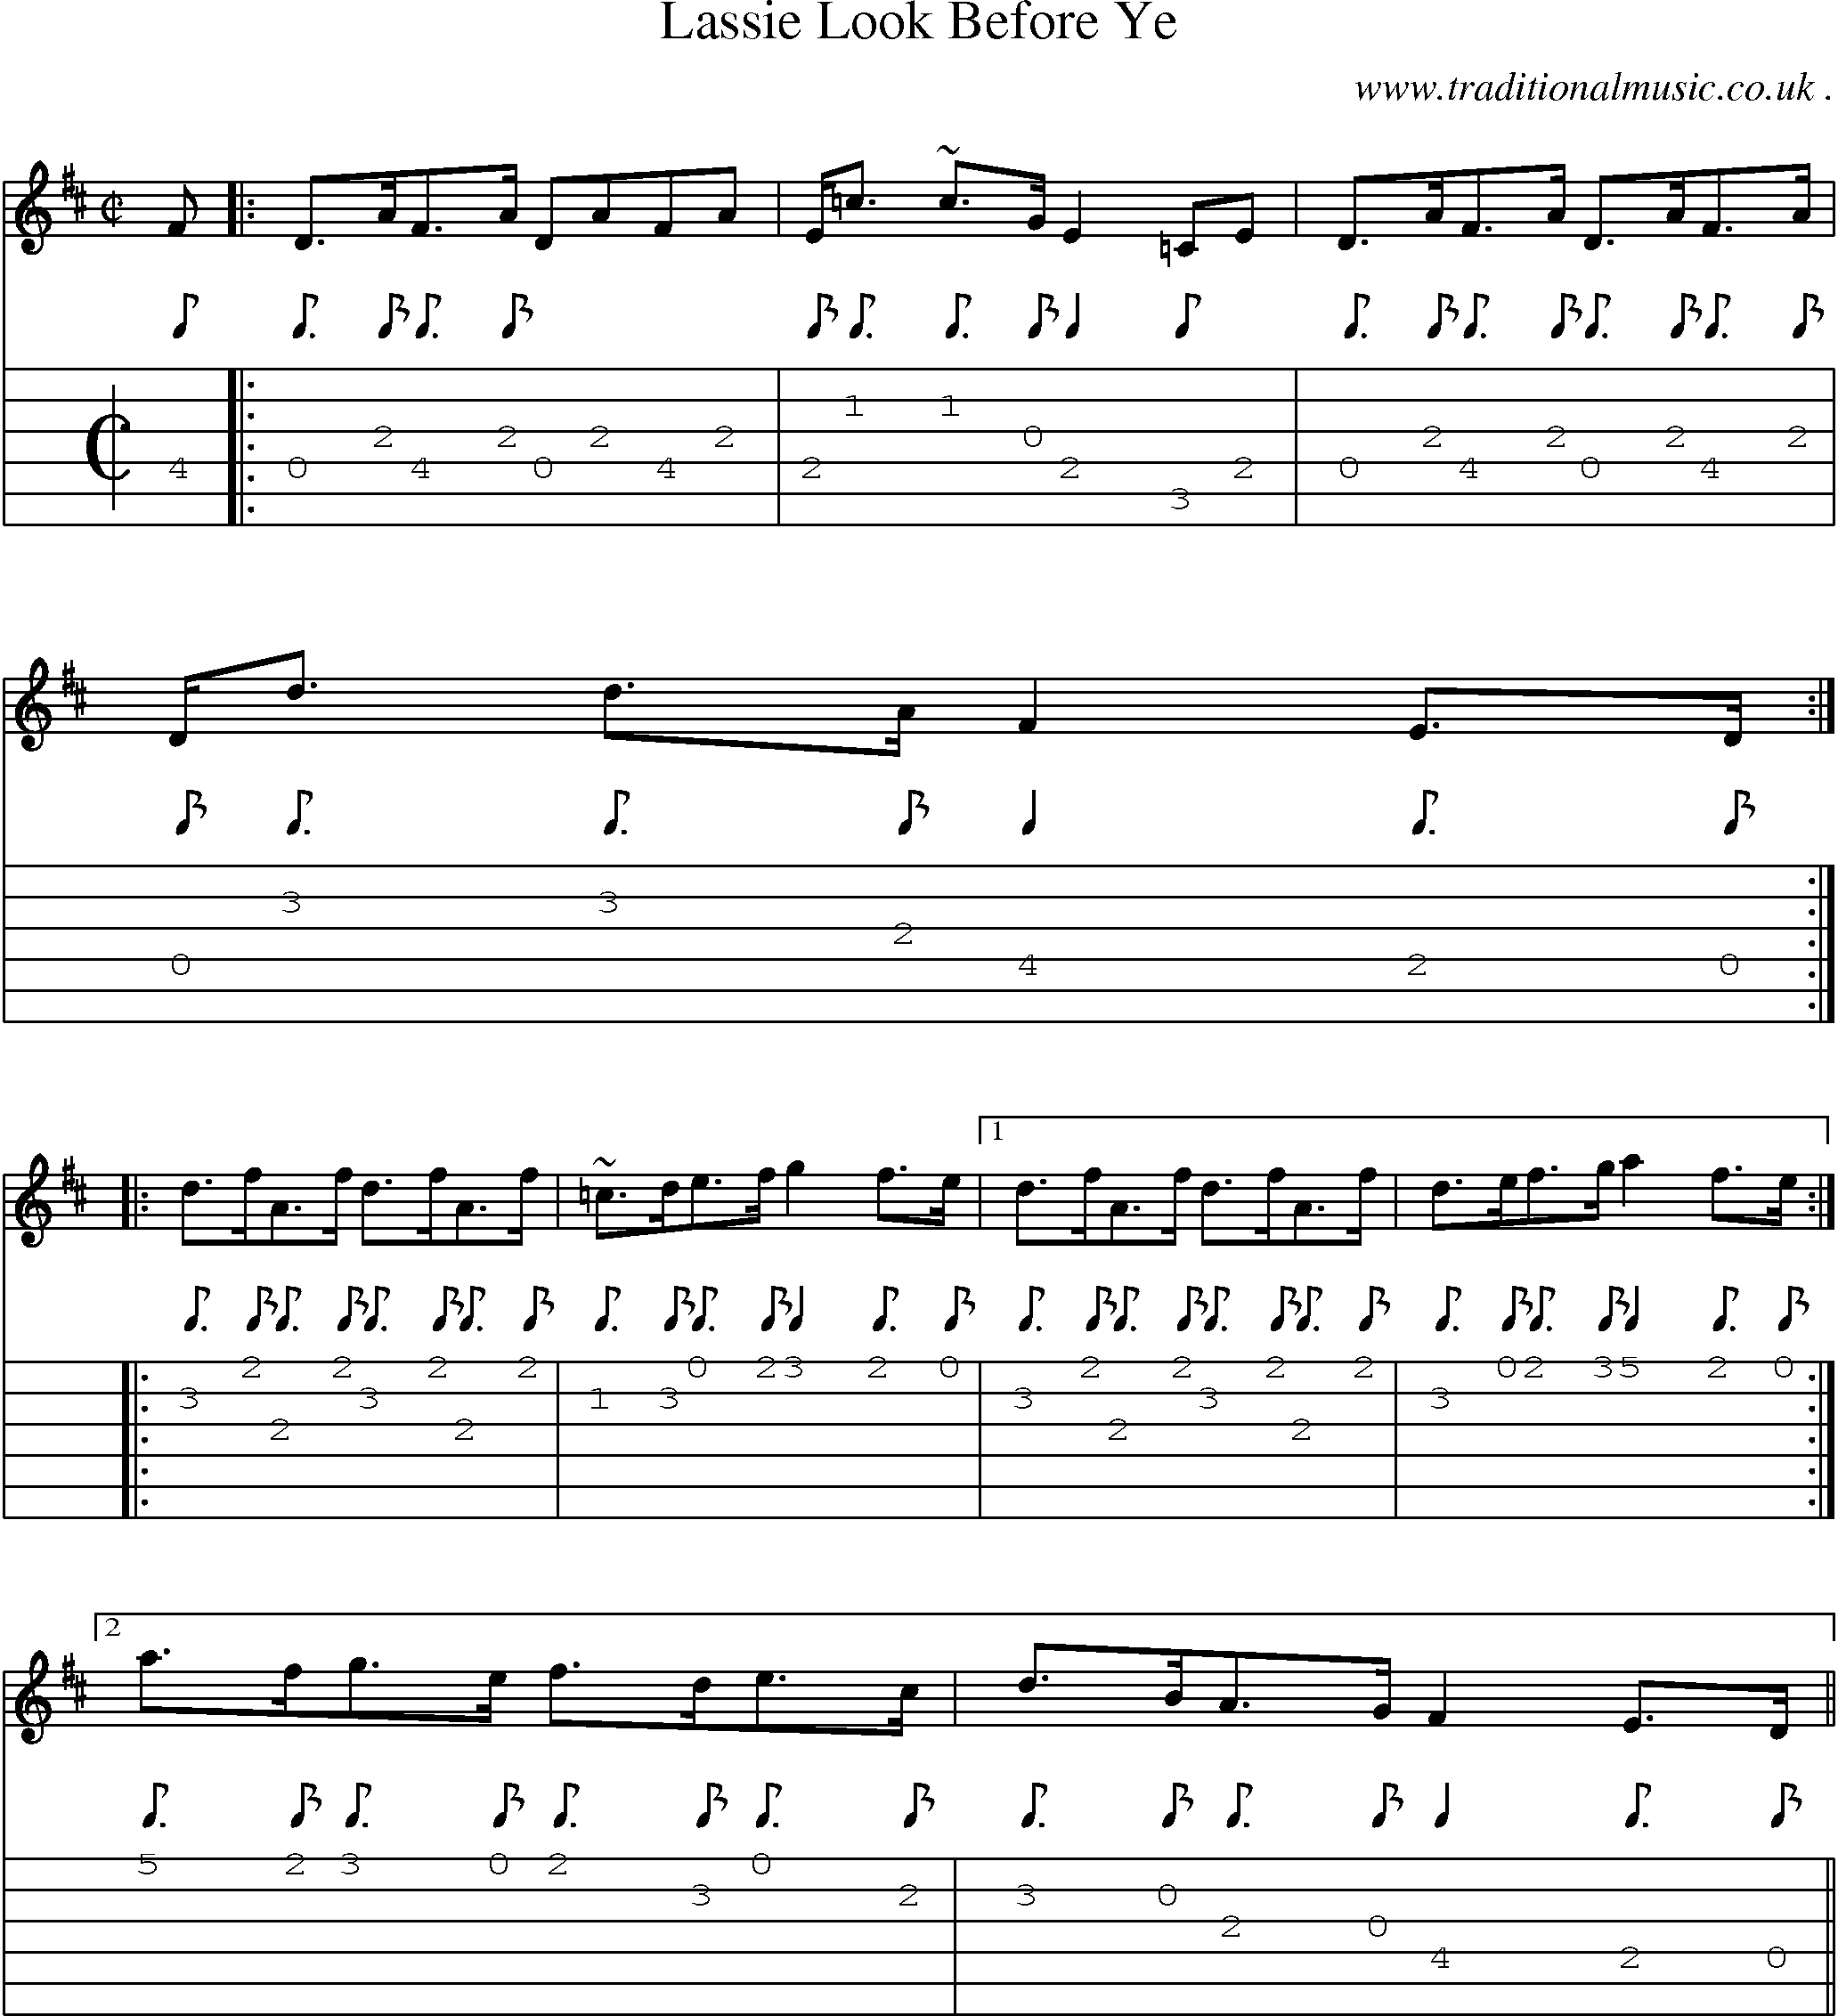 Sheet-music  score, Chords and Guitar Tabs for Lassie Look Before Ye